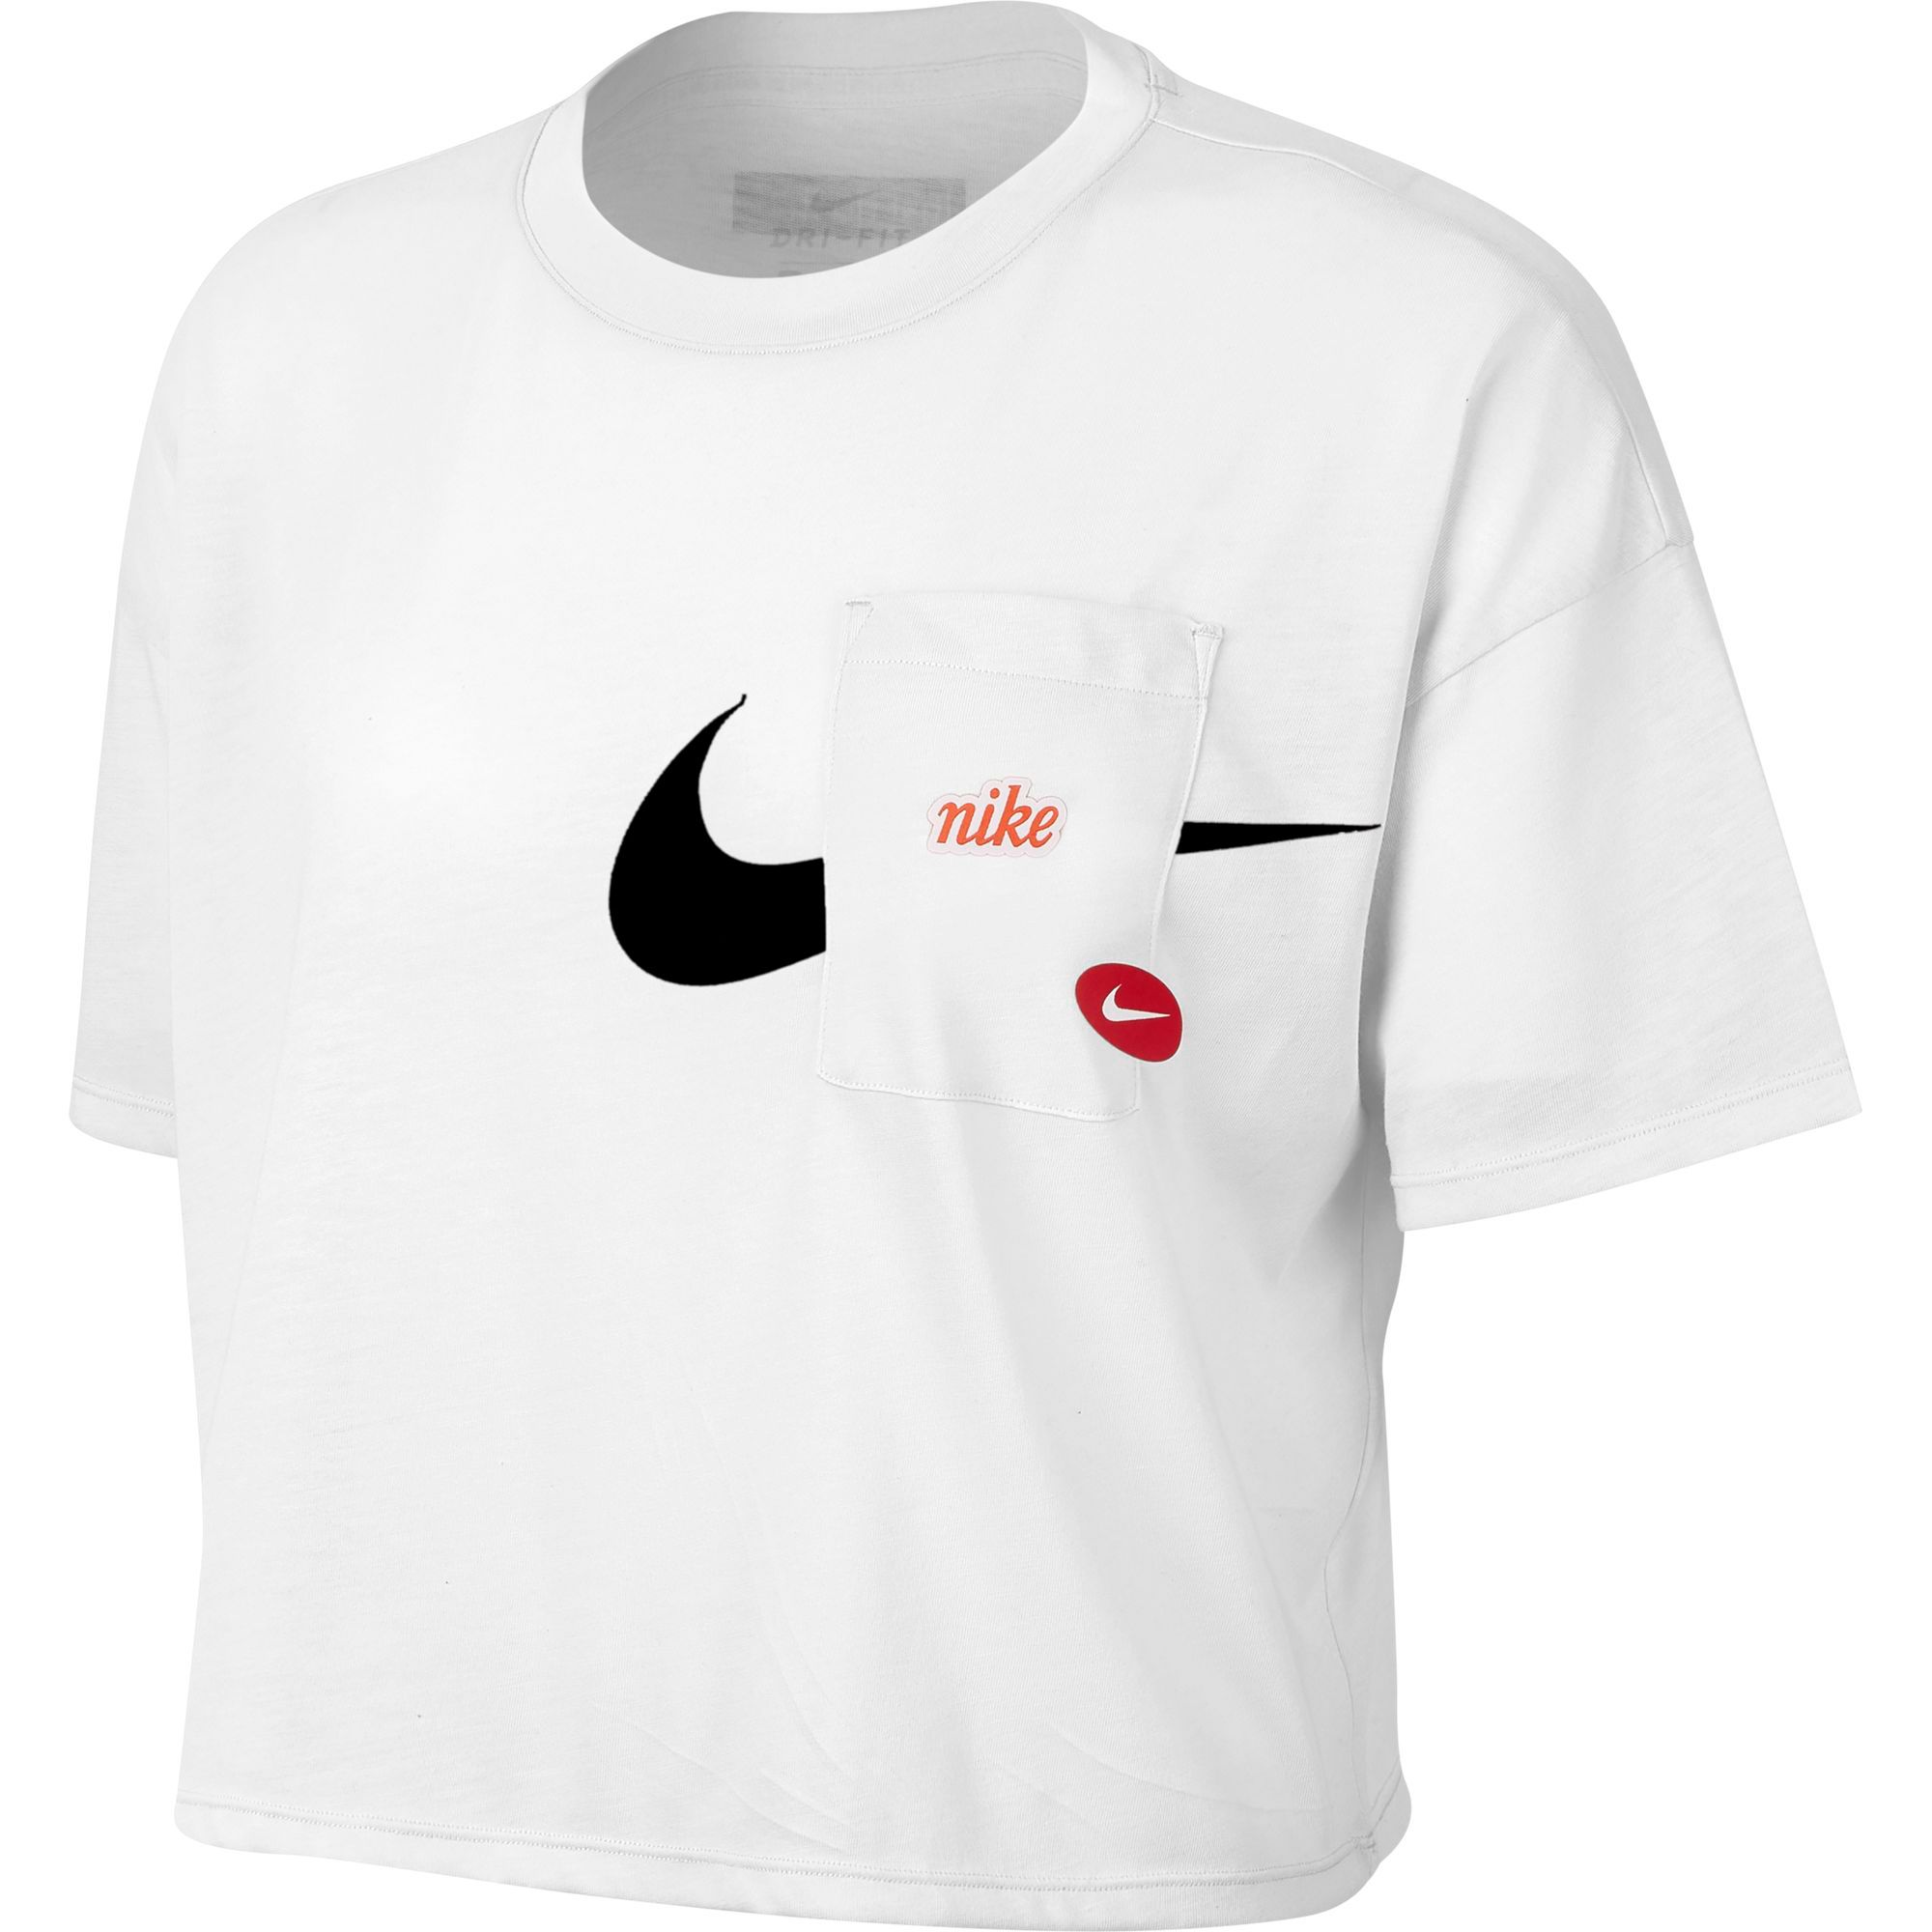 nike just do it cropped t shirt